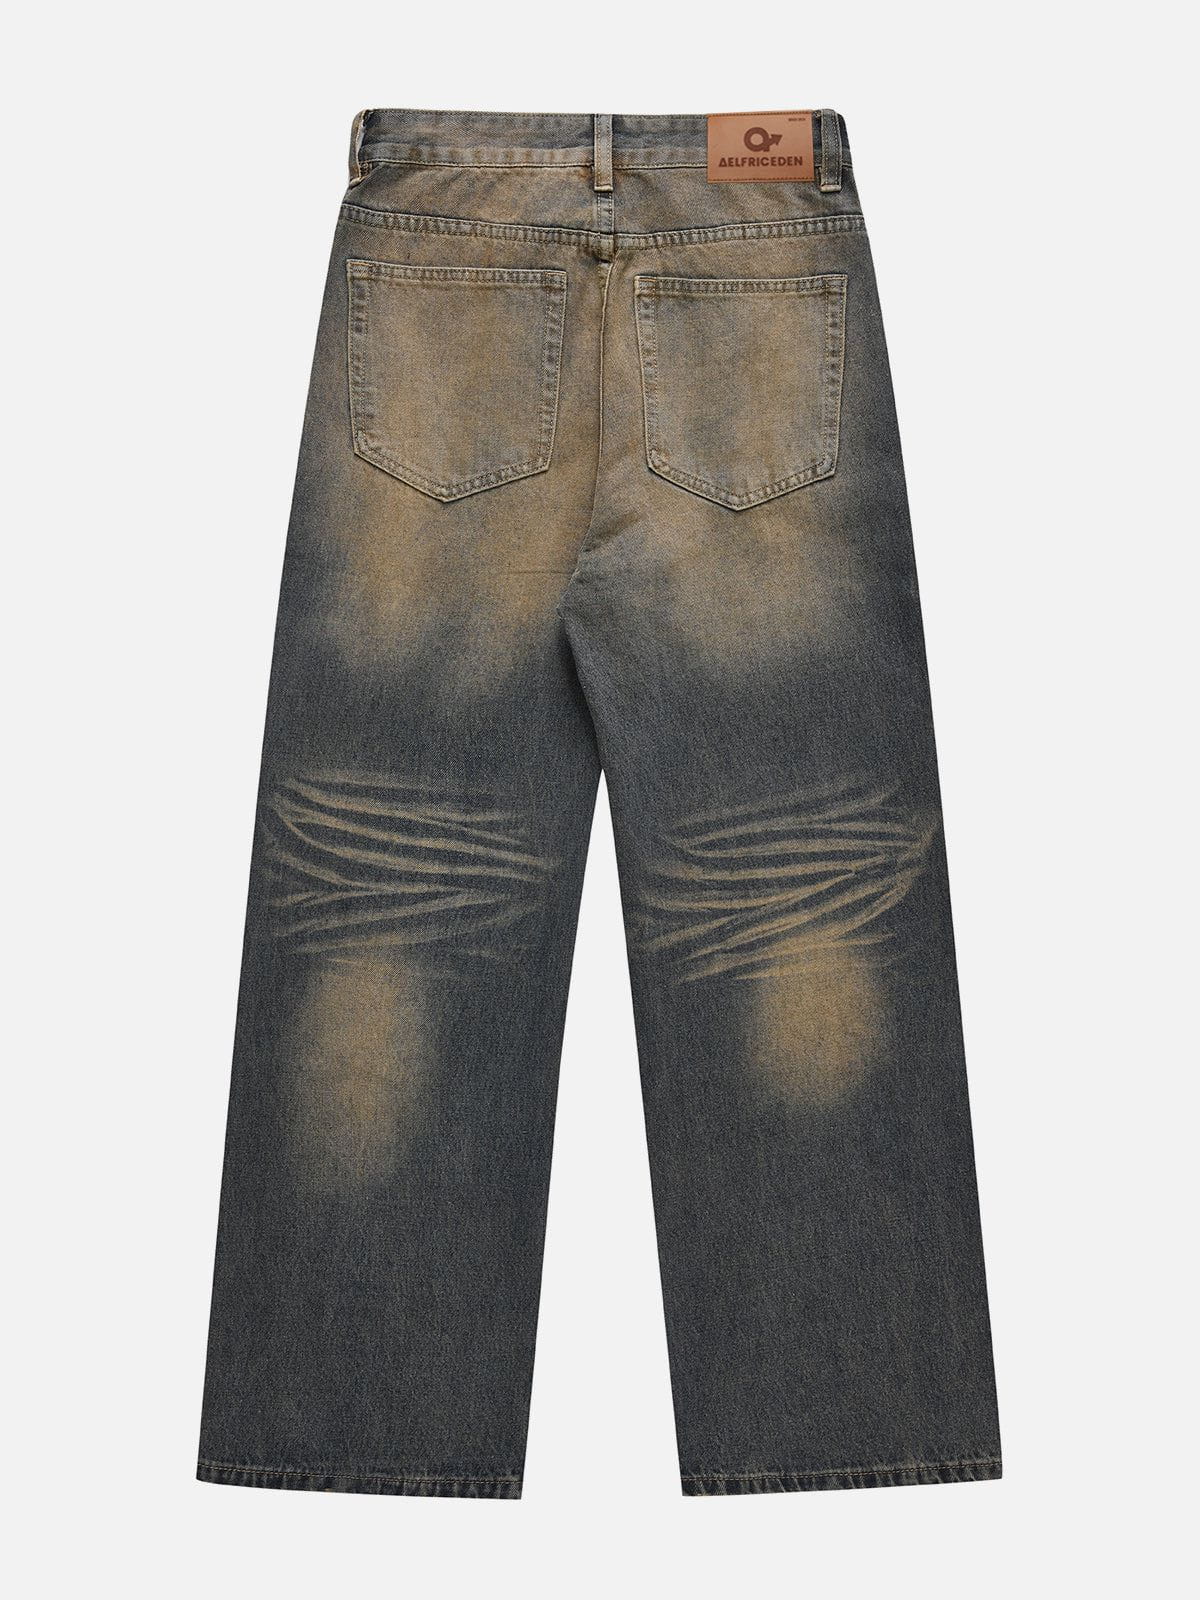 Aelfric Eden Mud Dyeing Washed Jeans